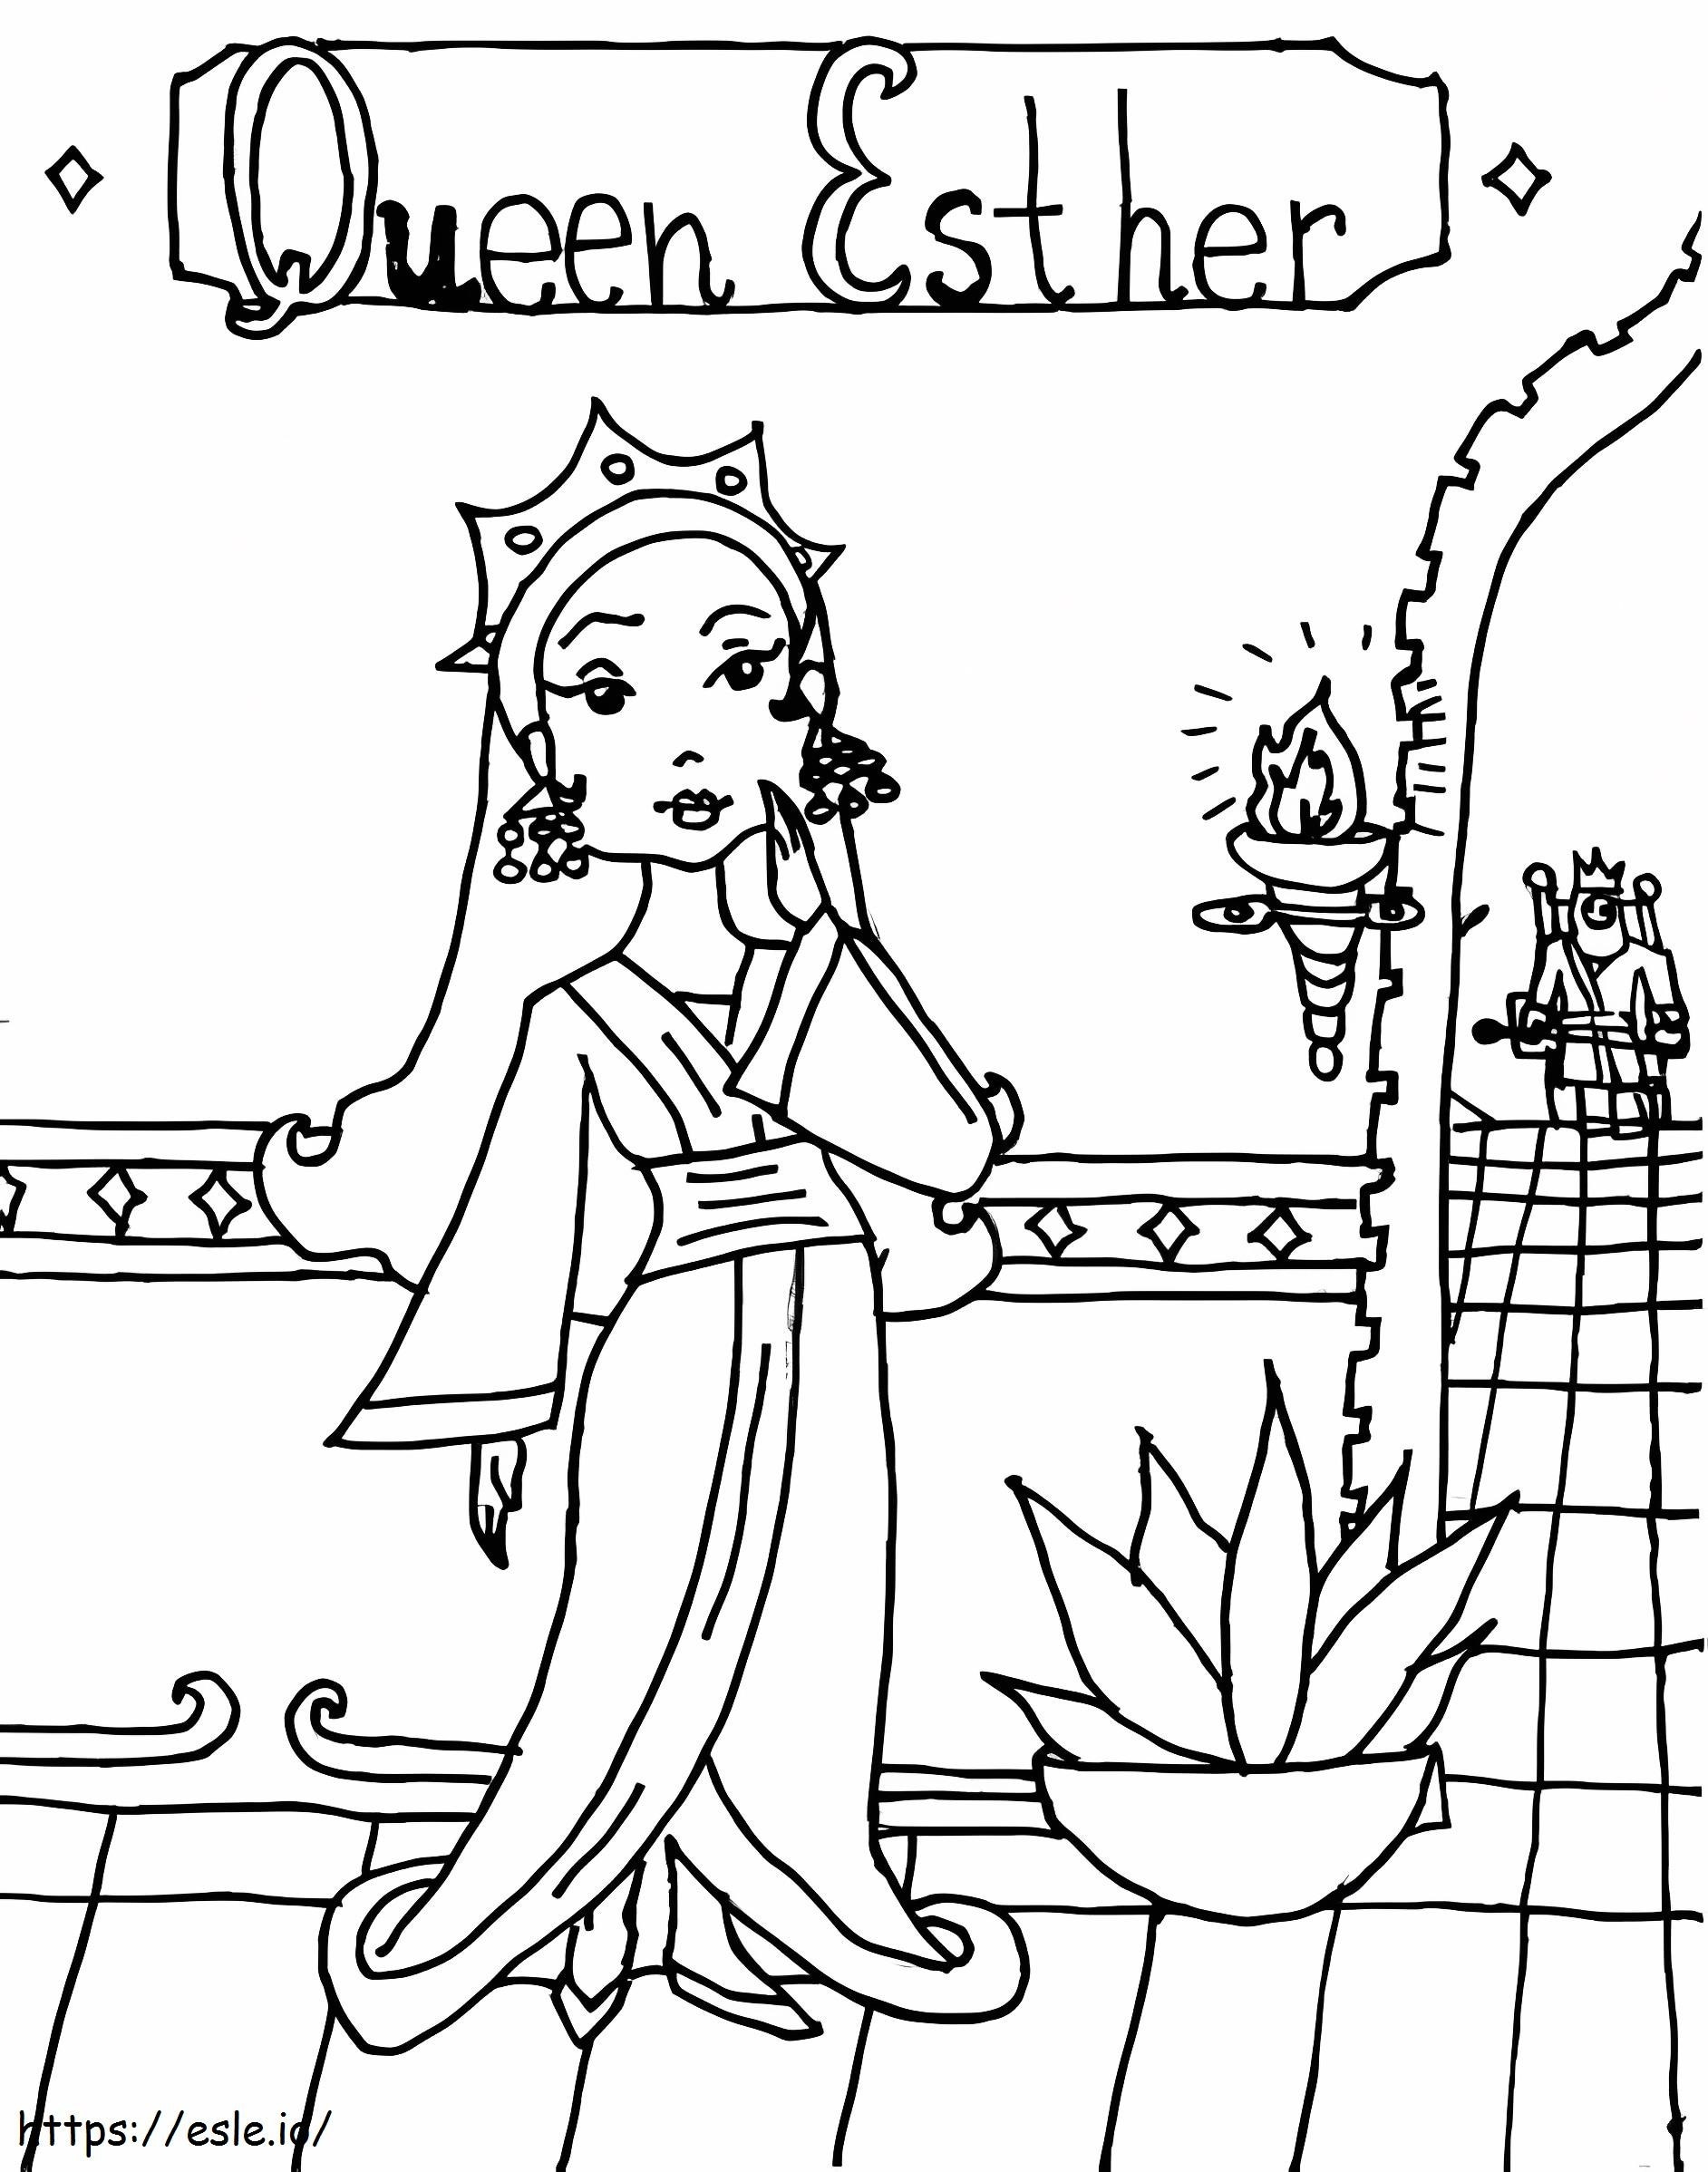 Queen Esther 7 coloring page